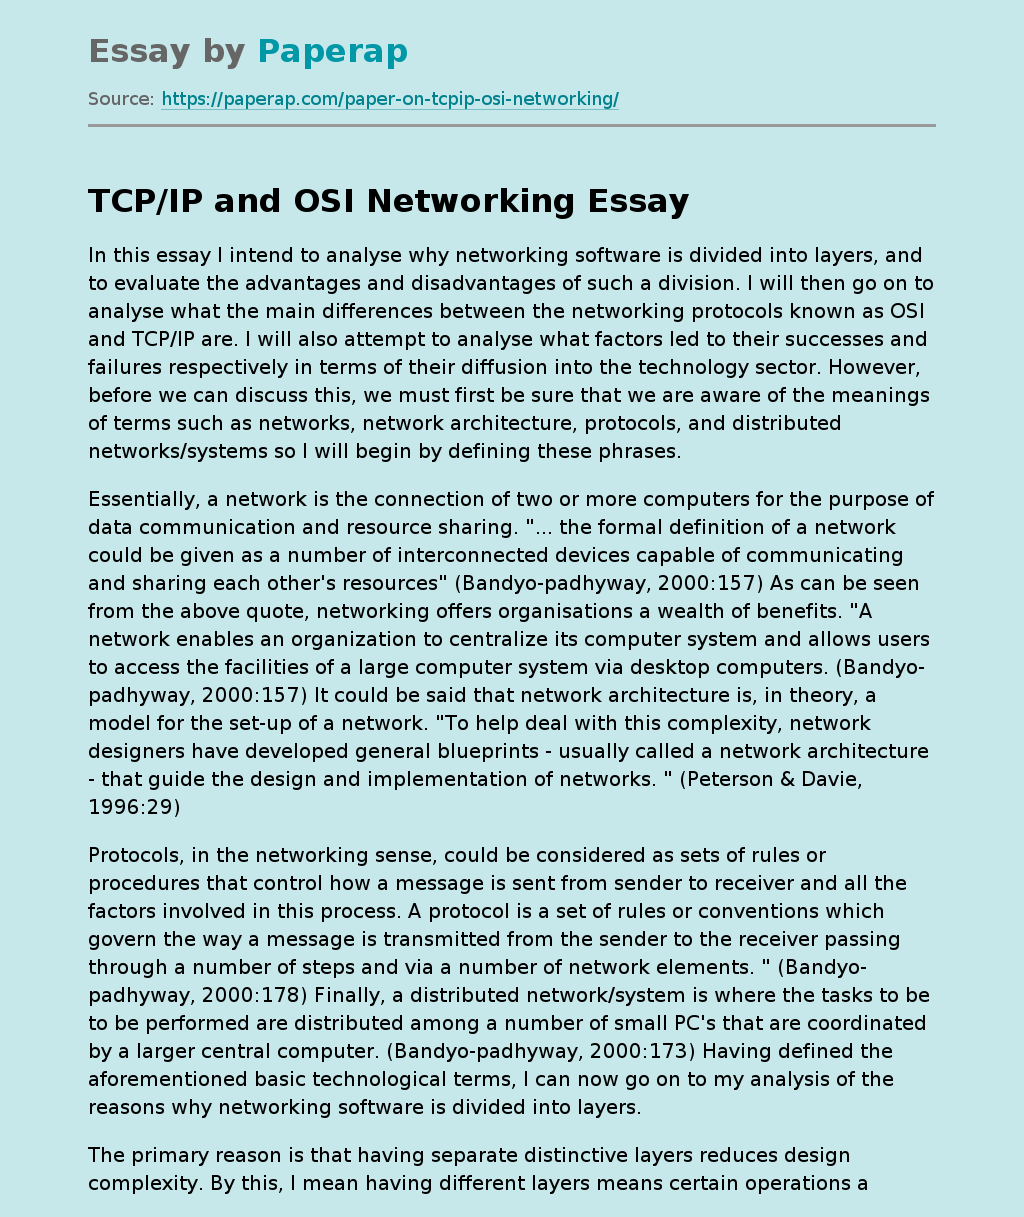 TCP/IP and OSI Networking